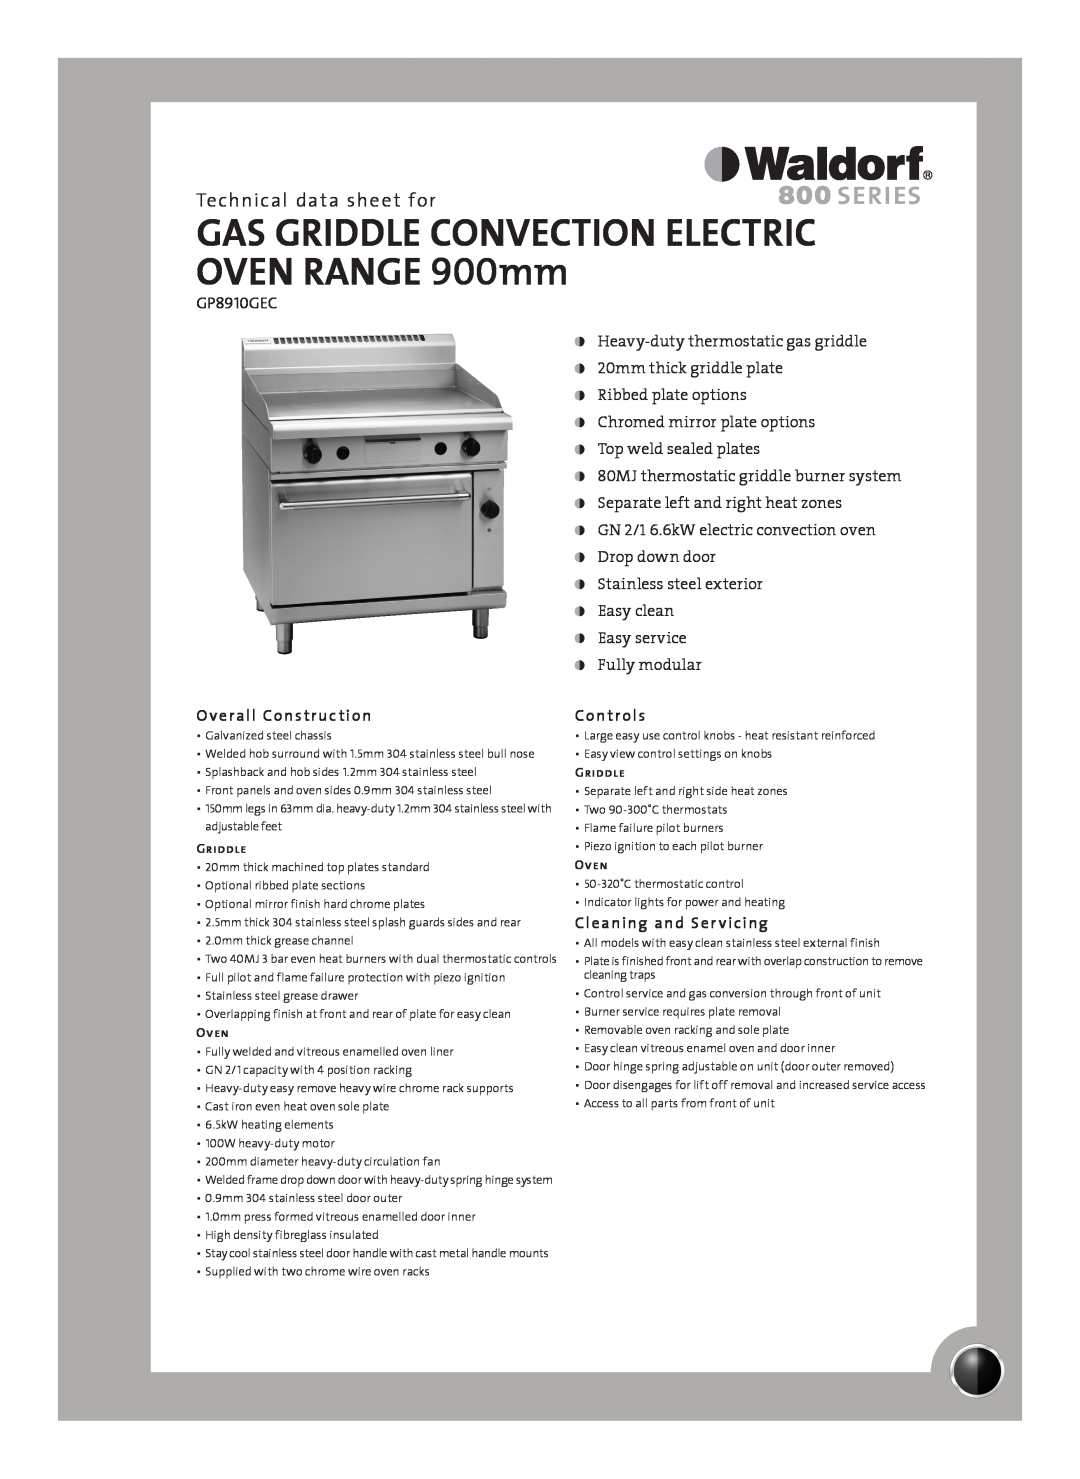 Moffat GP8910GEC manual Technical data sheet for, Overall Construction, Controls, Cleaning and Ser vicing 